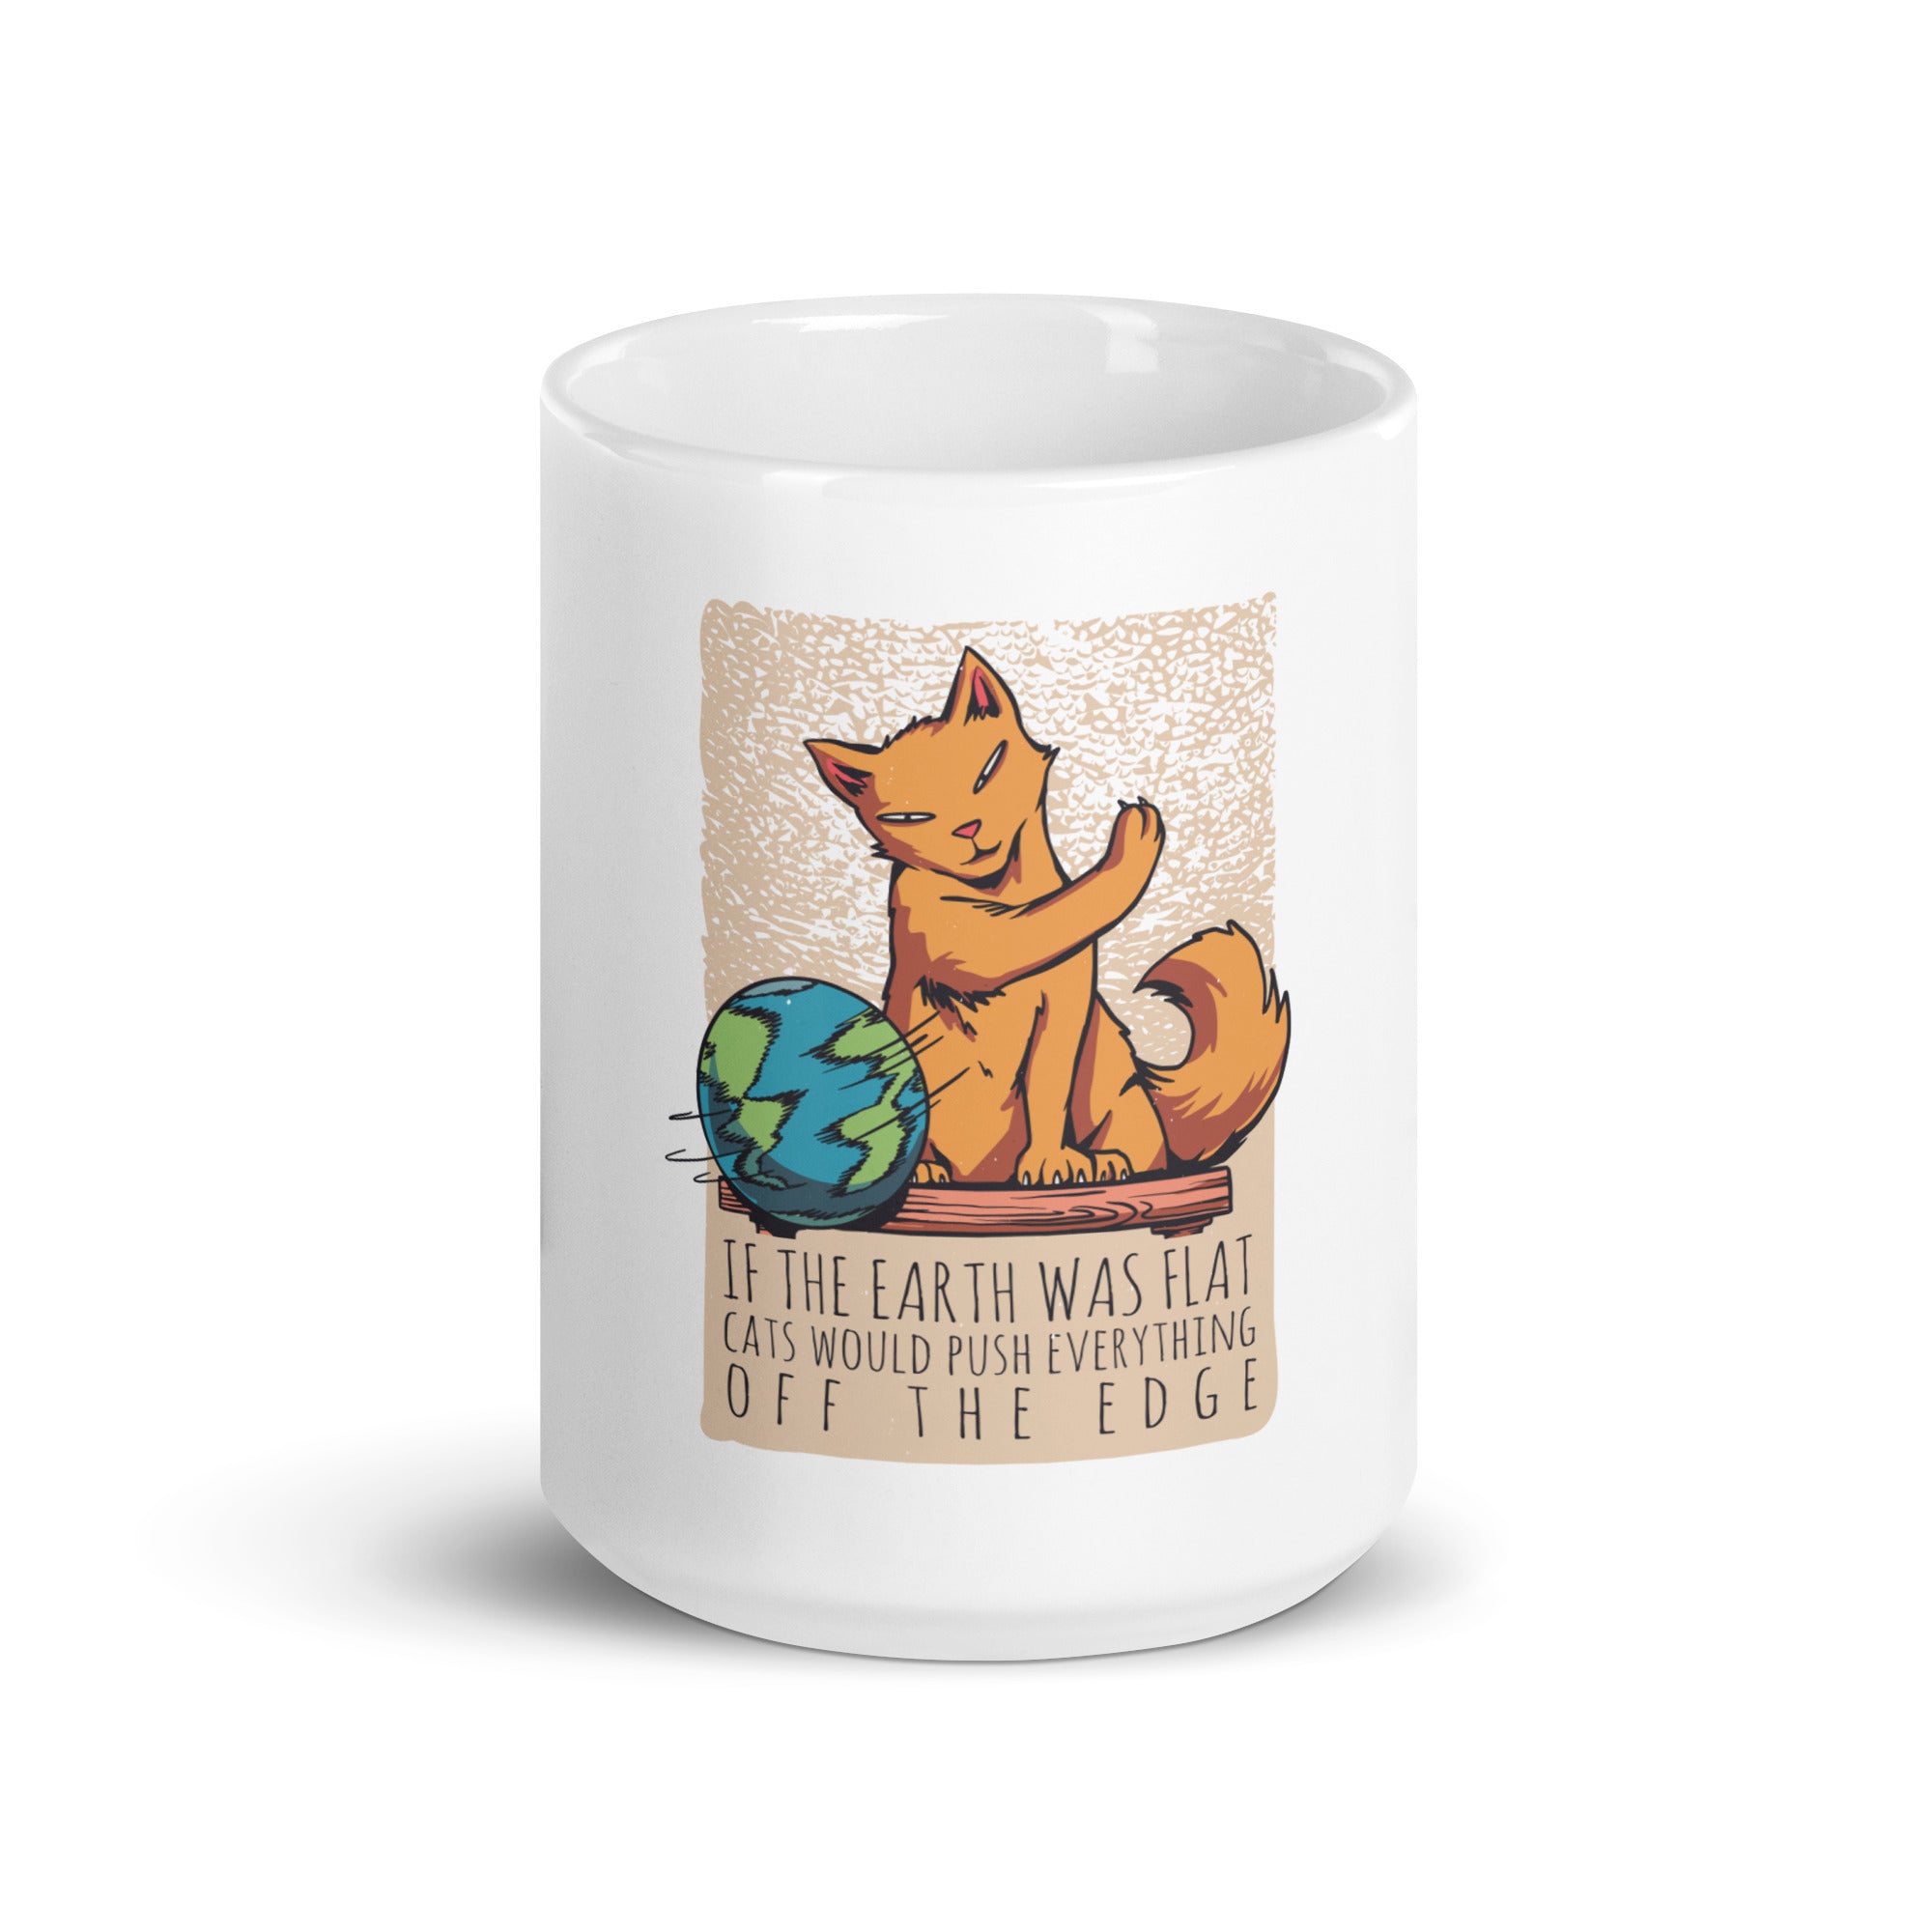 White glossy mug | If the earth was flat, cats would push everything off the edge